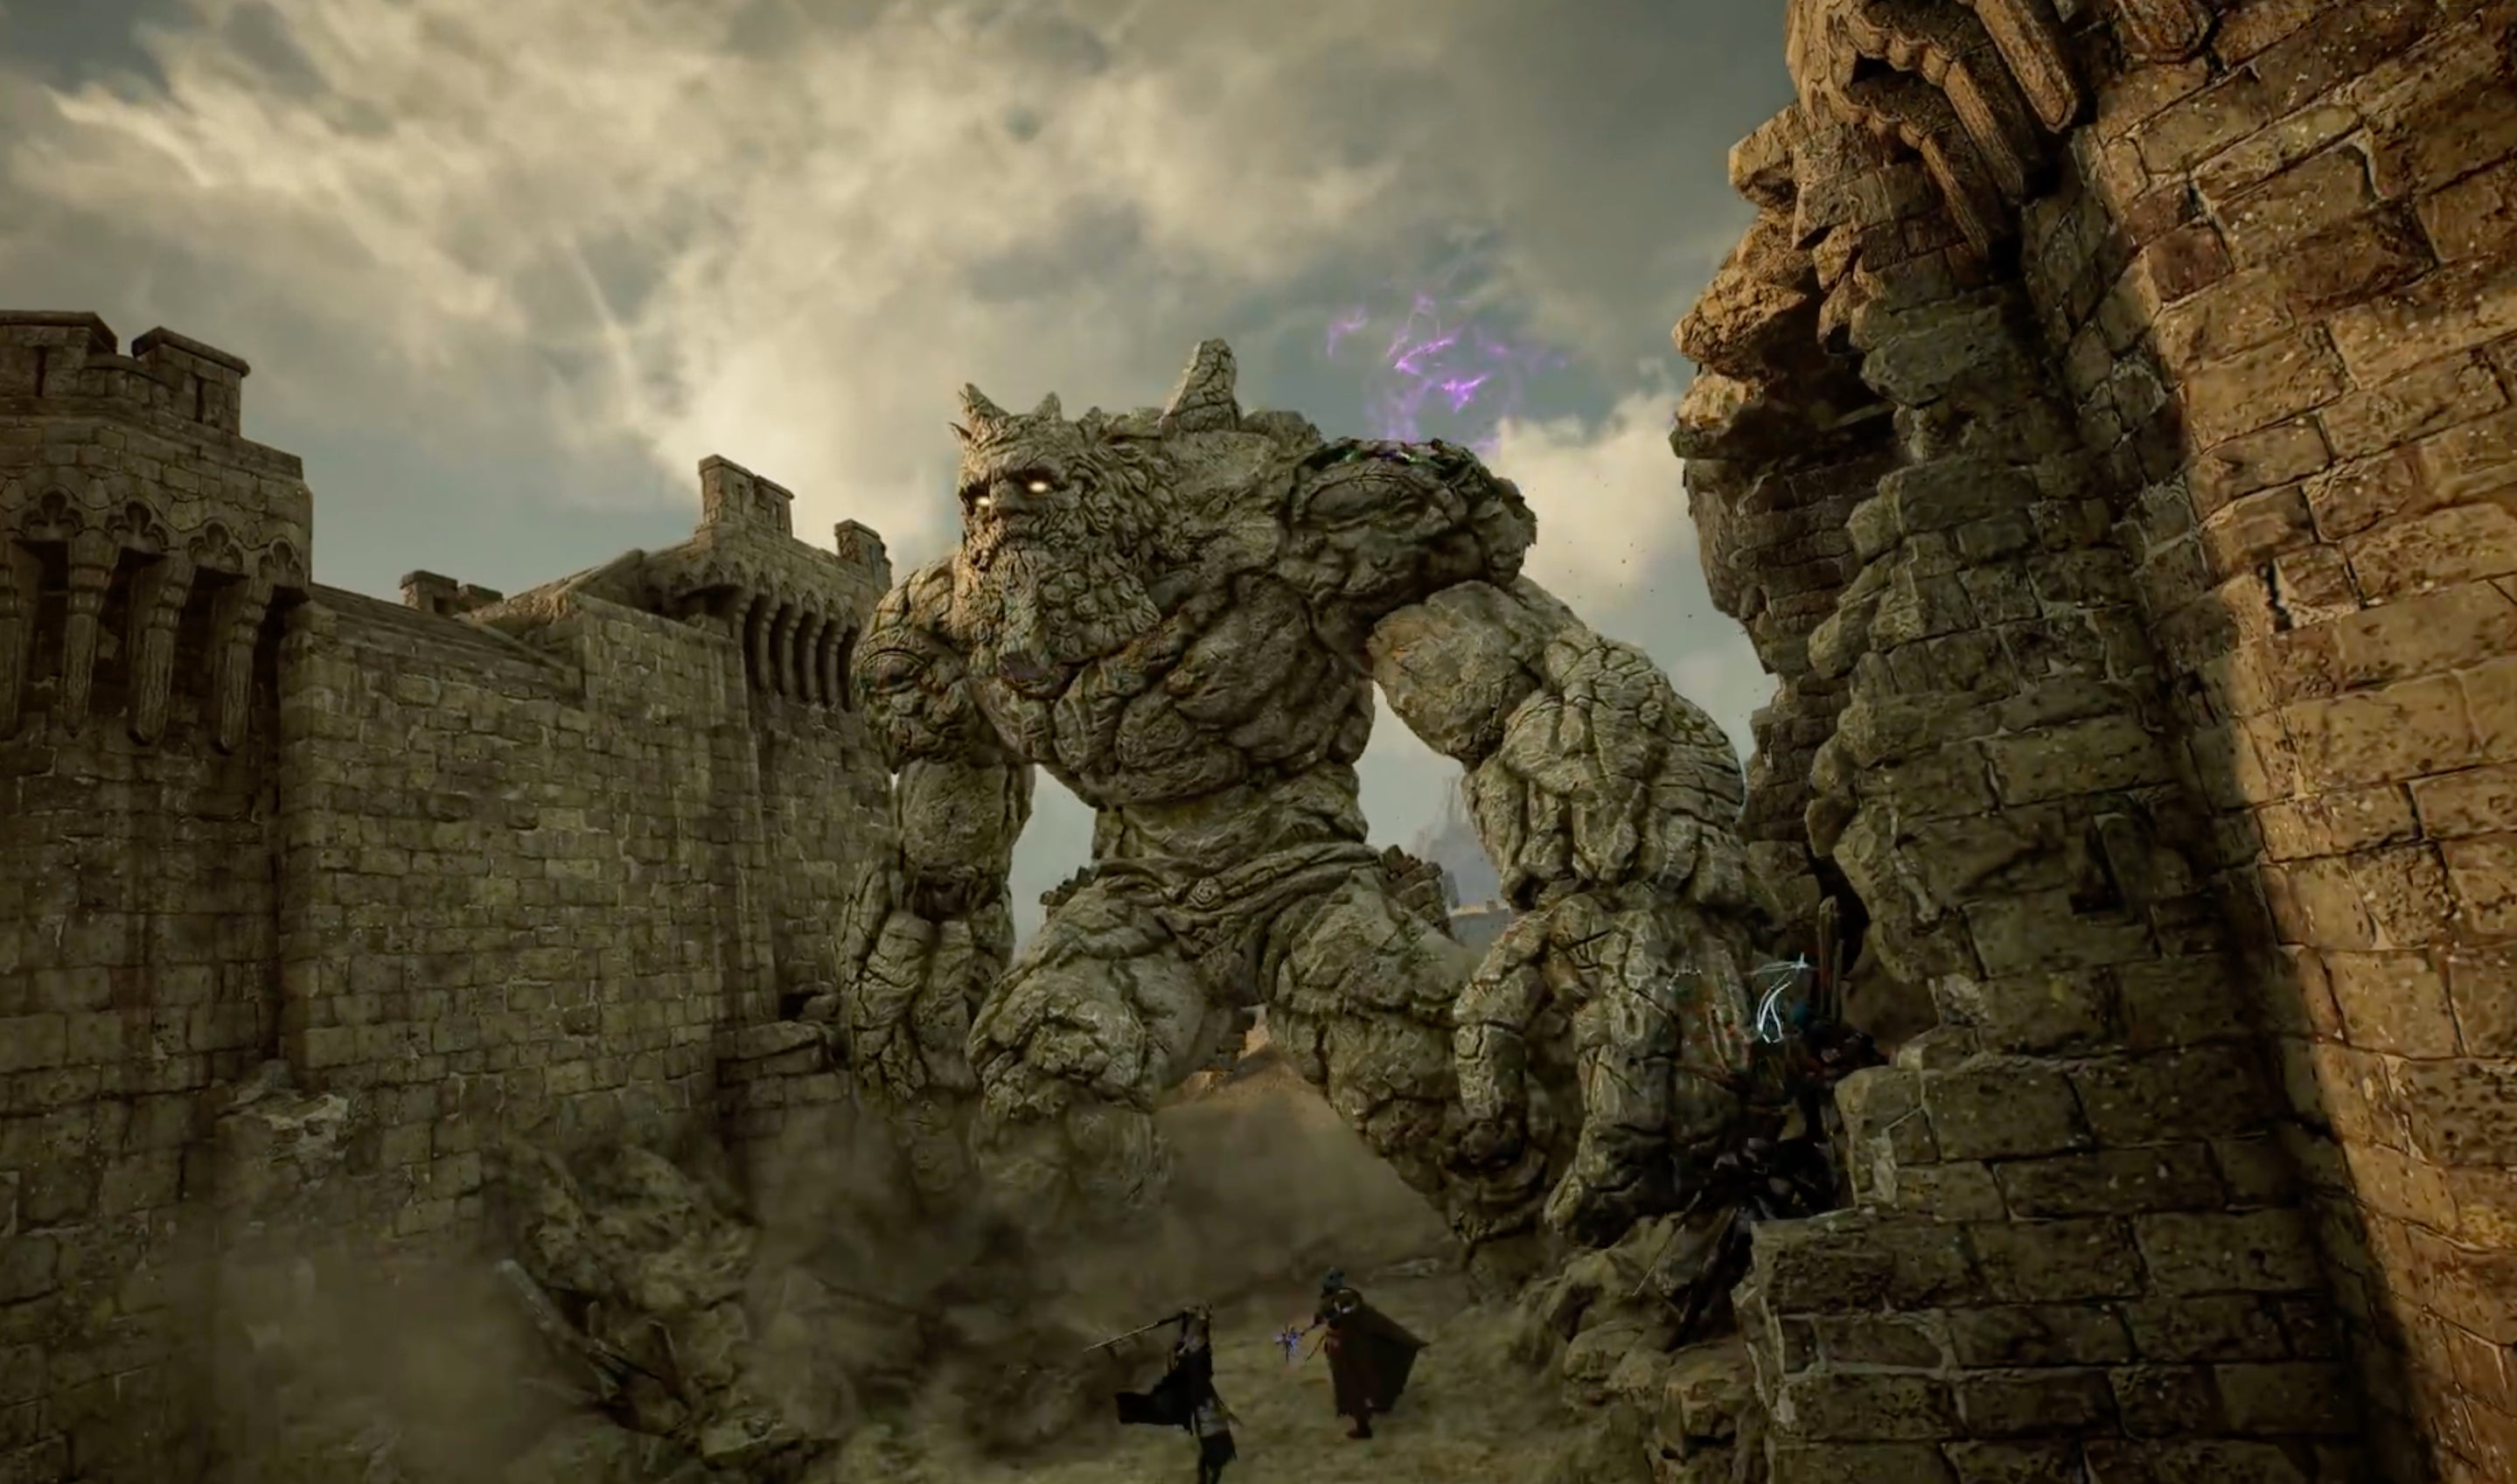 A stone giant breaks down a cities' wall in Throne And Liberty